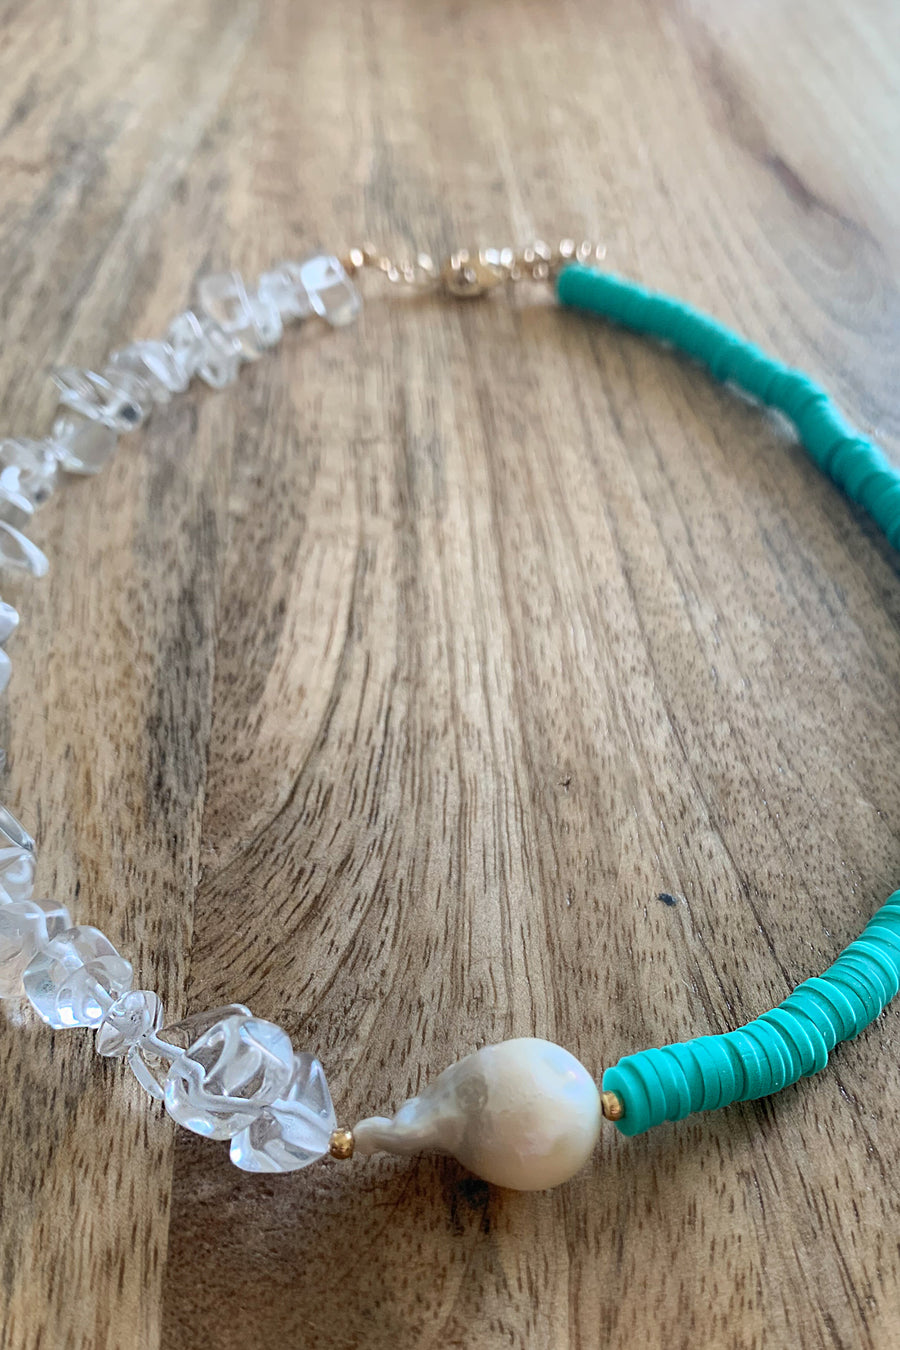 Cluster Choker Necklace - Turquoise - Nous Wanderlust Stories